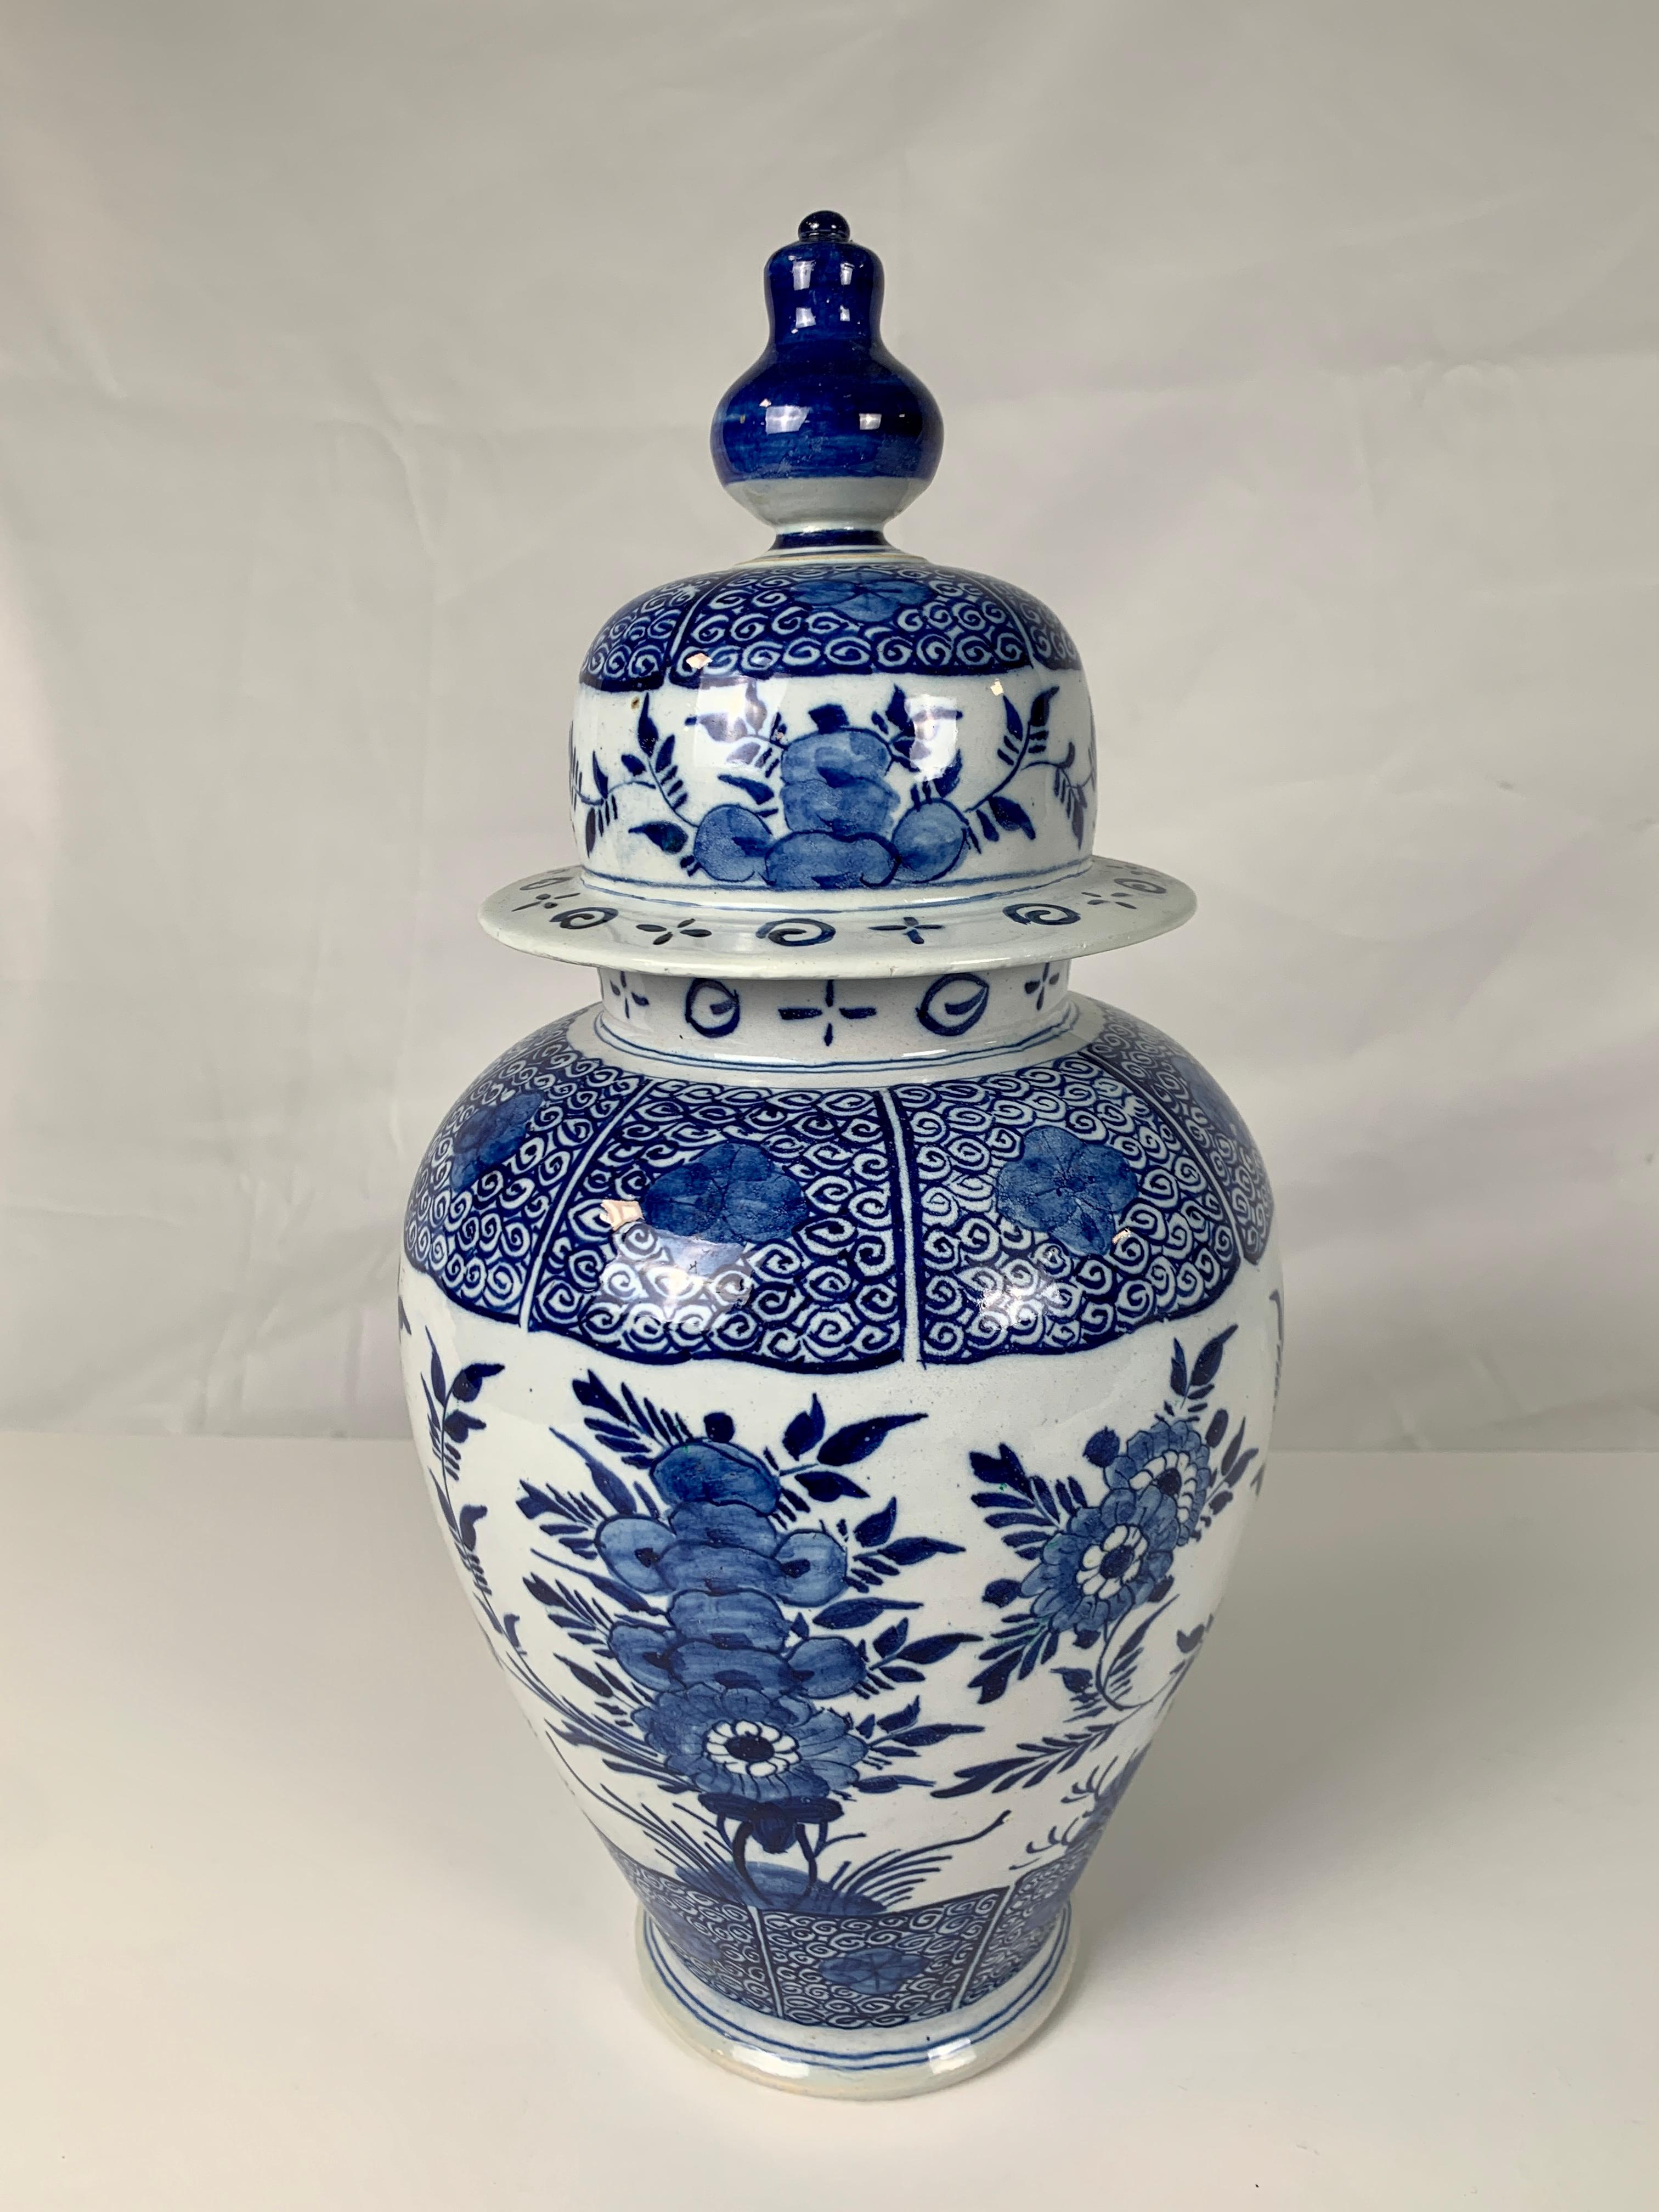 Group of Large Dutch Delft Jars and Vases 18th-19th and 20th Centuries 7